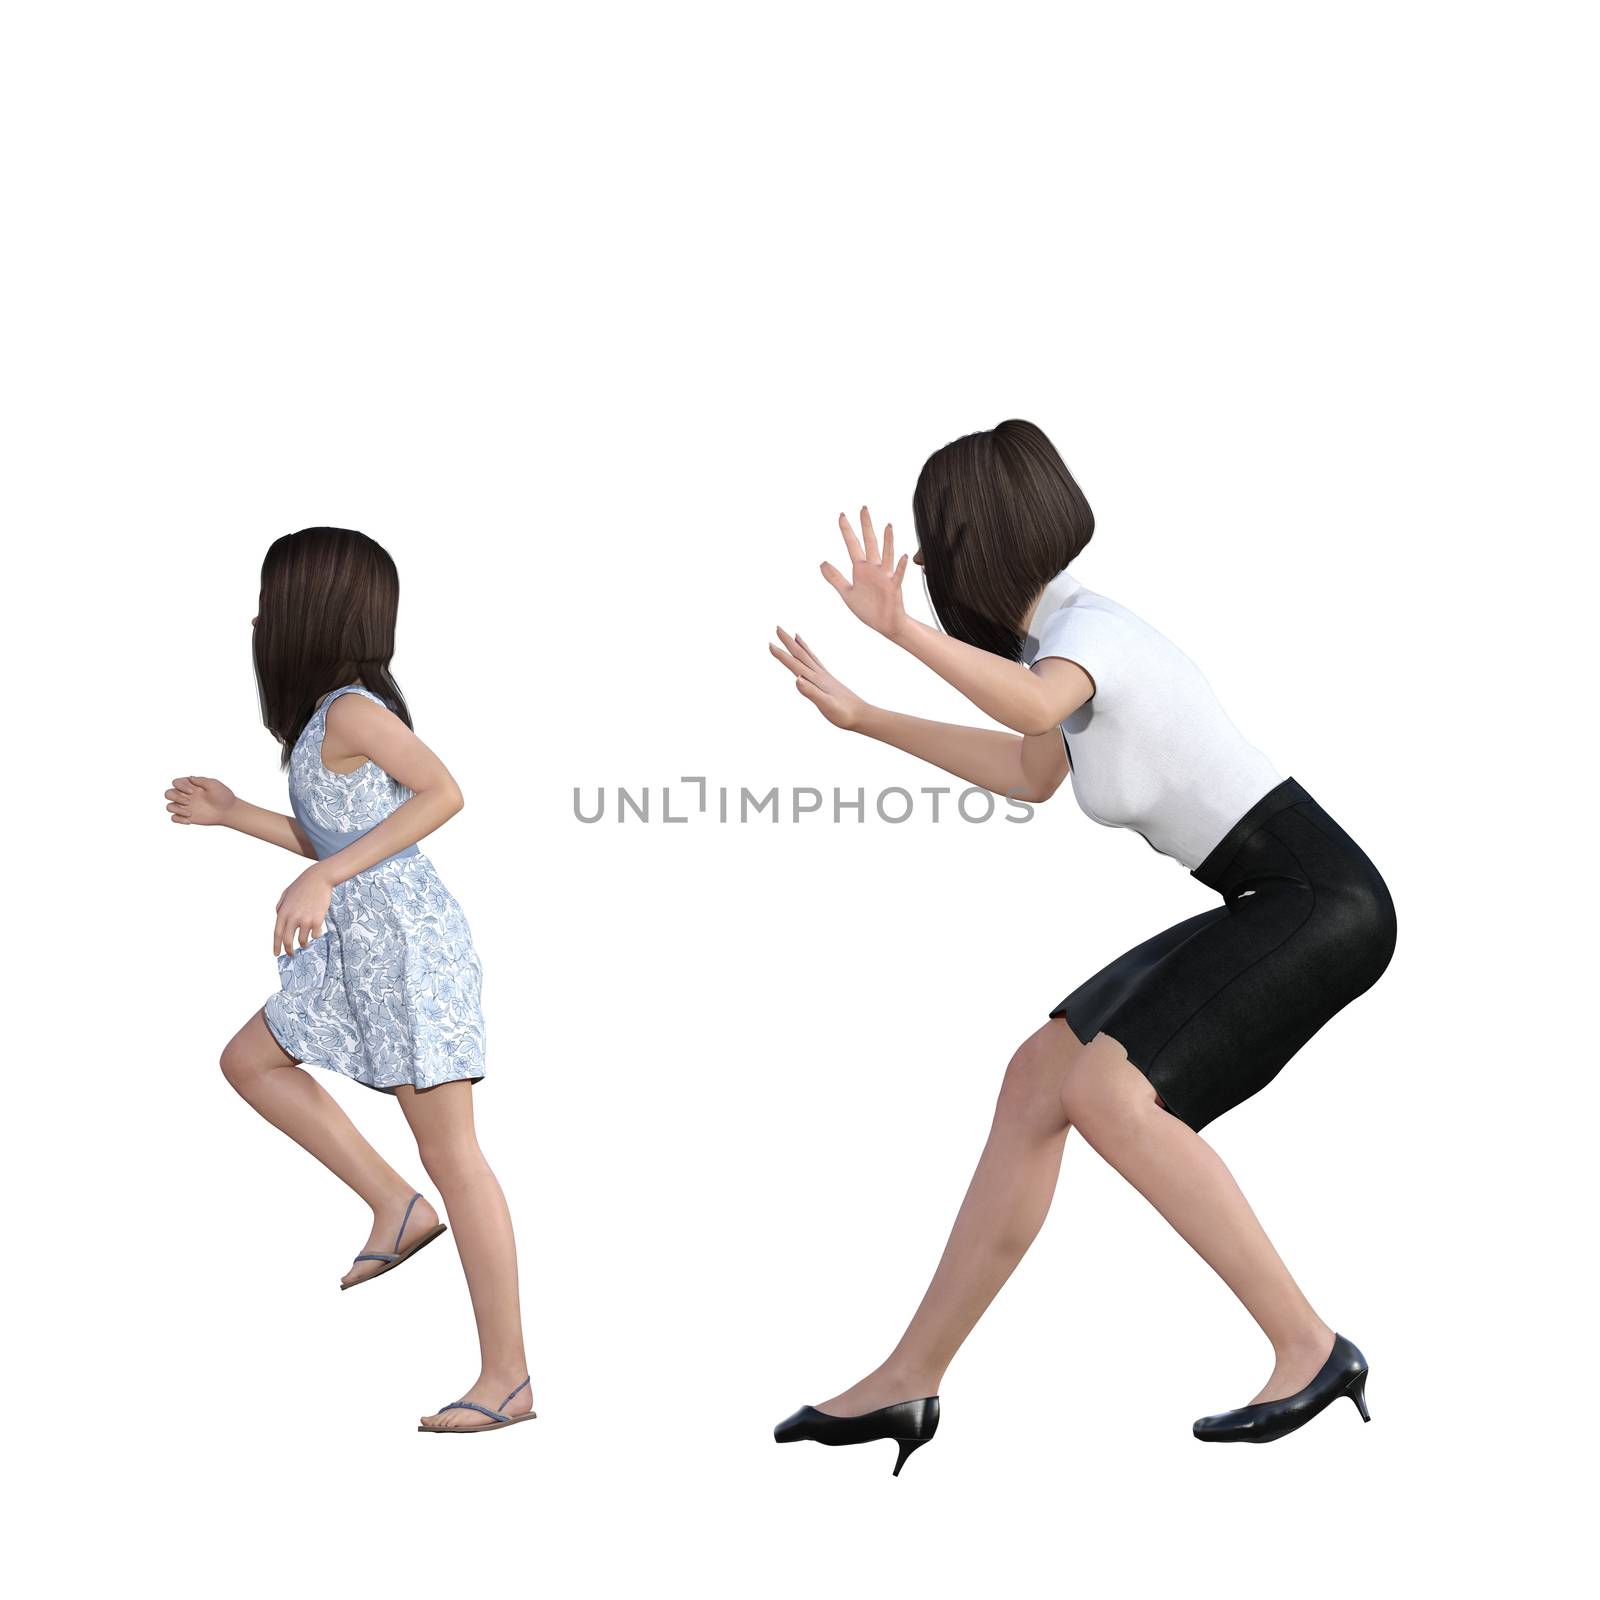 Mother Daughter Interaction of Mom Scaring Girl as an Illustration Concept